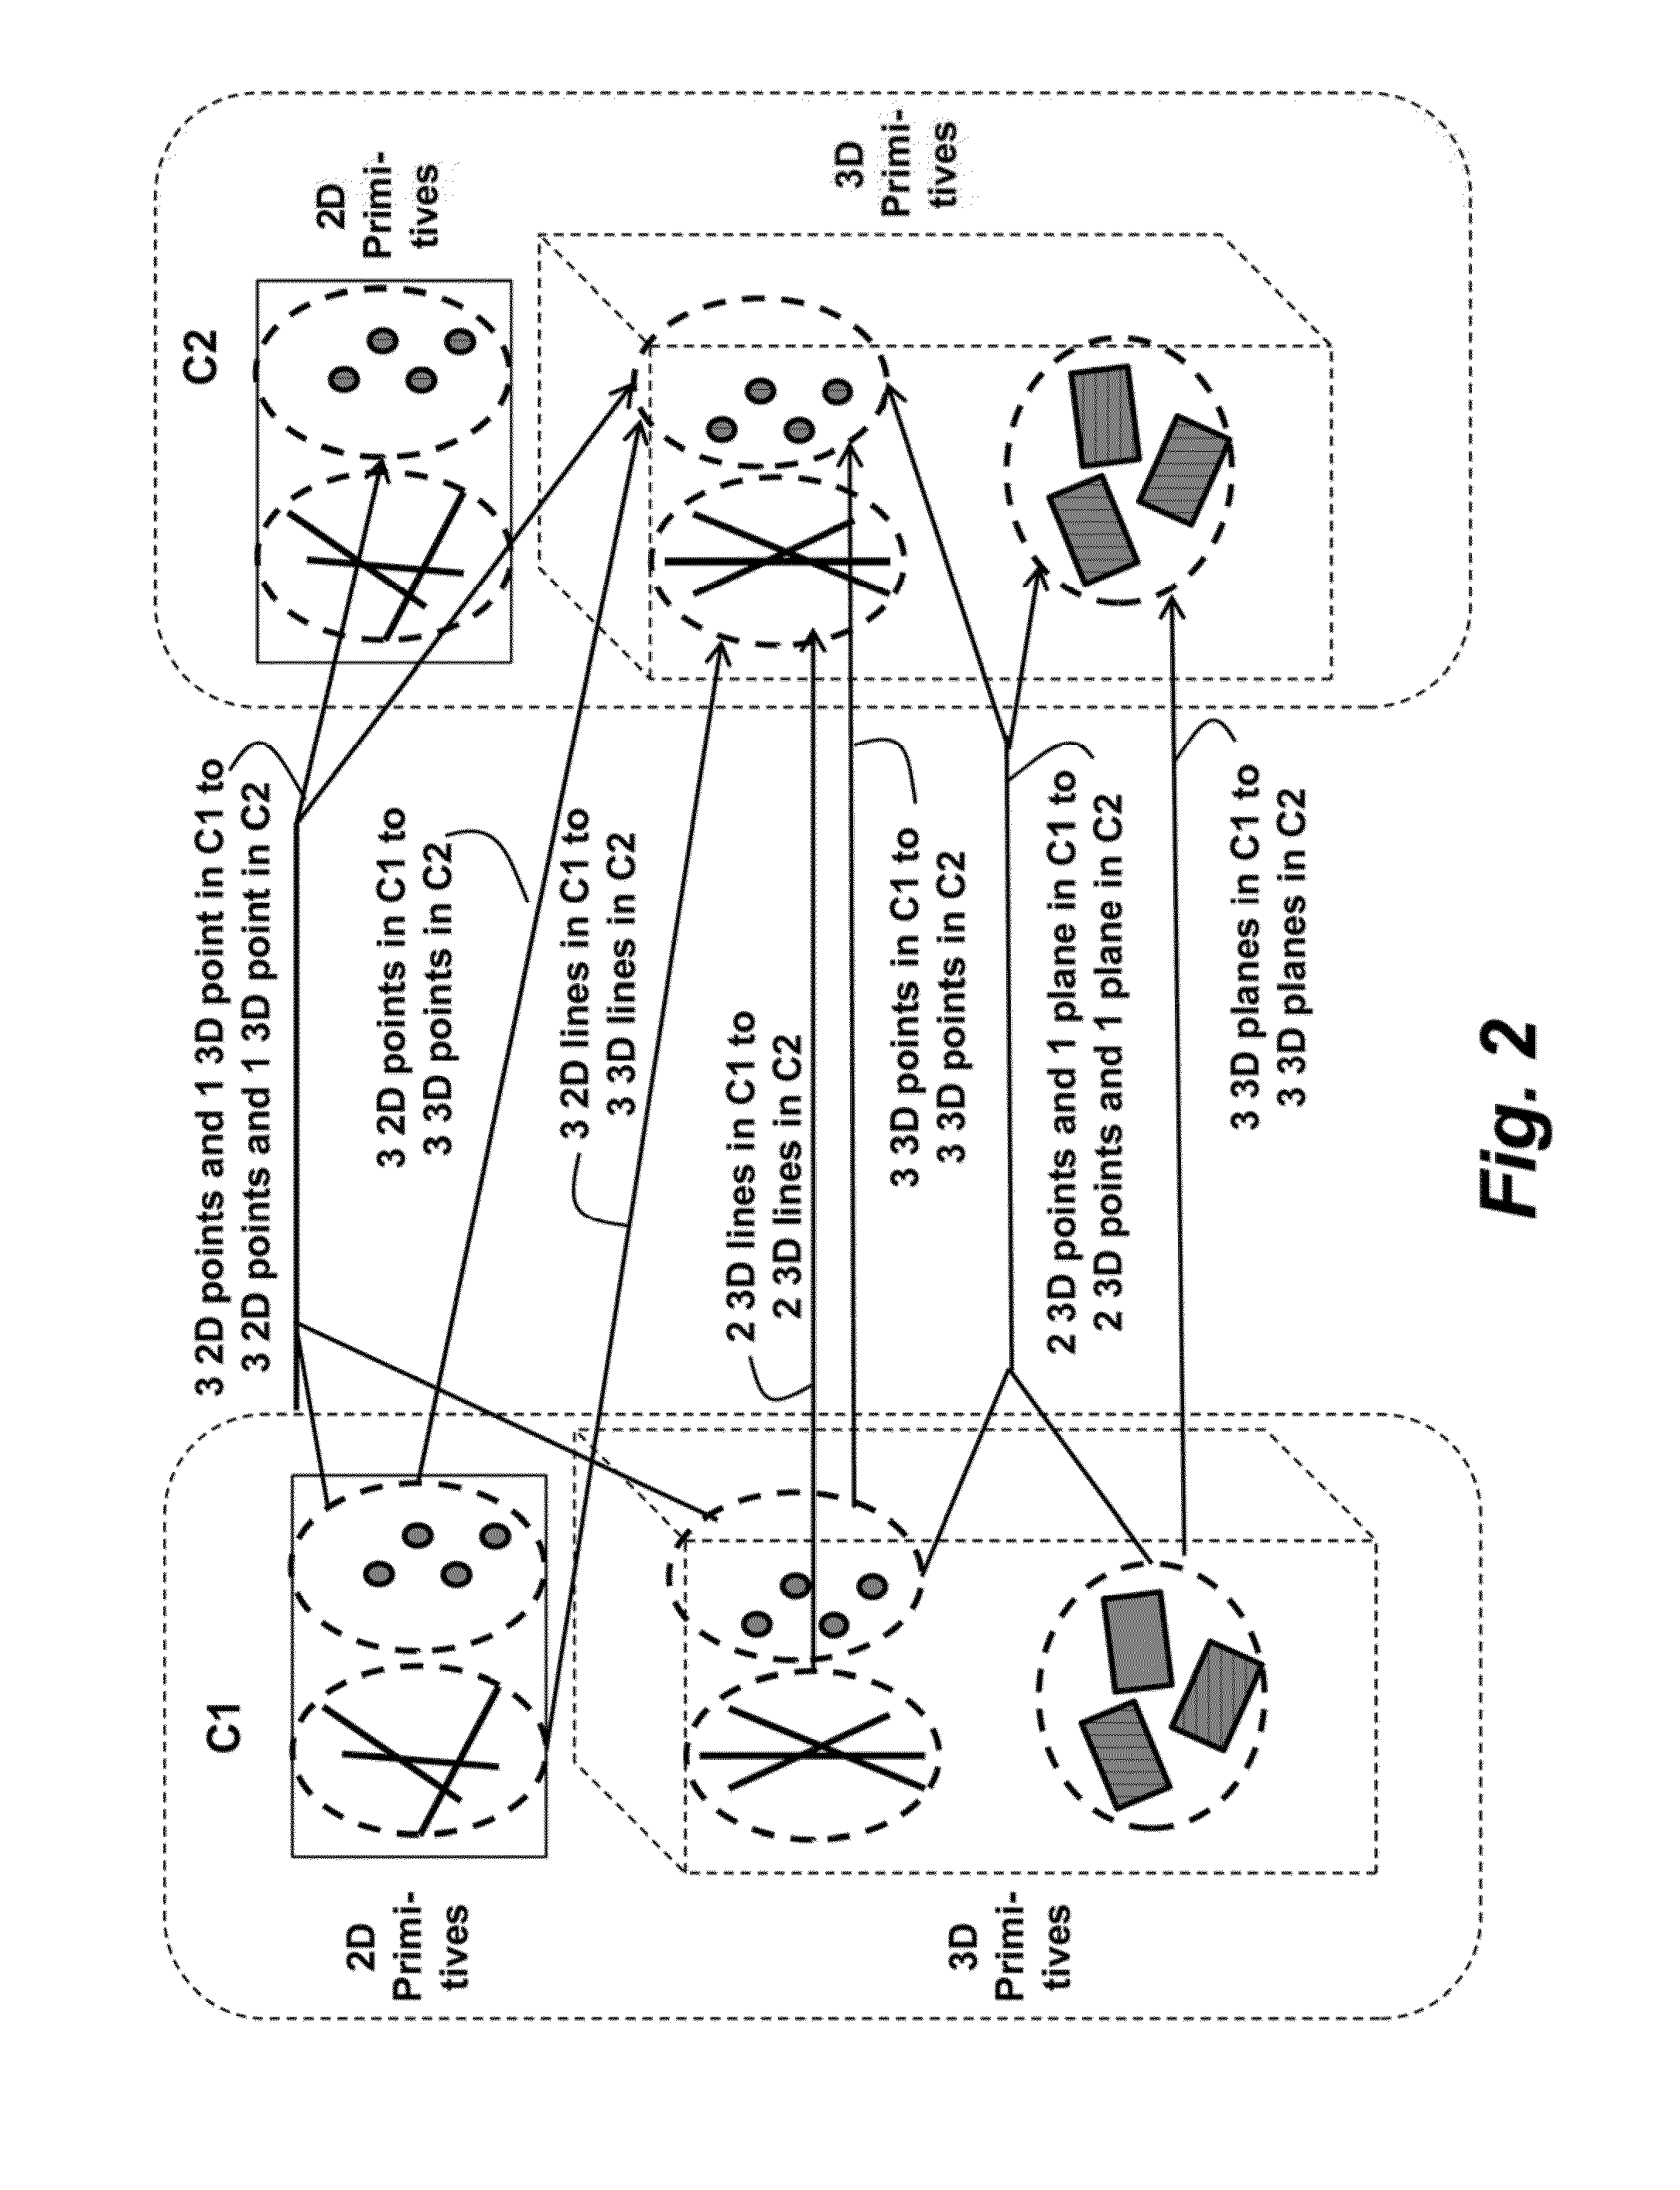 Method for stereo visual odometry using points, lines and planes